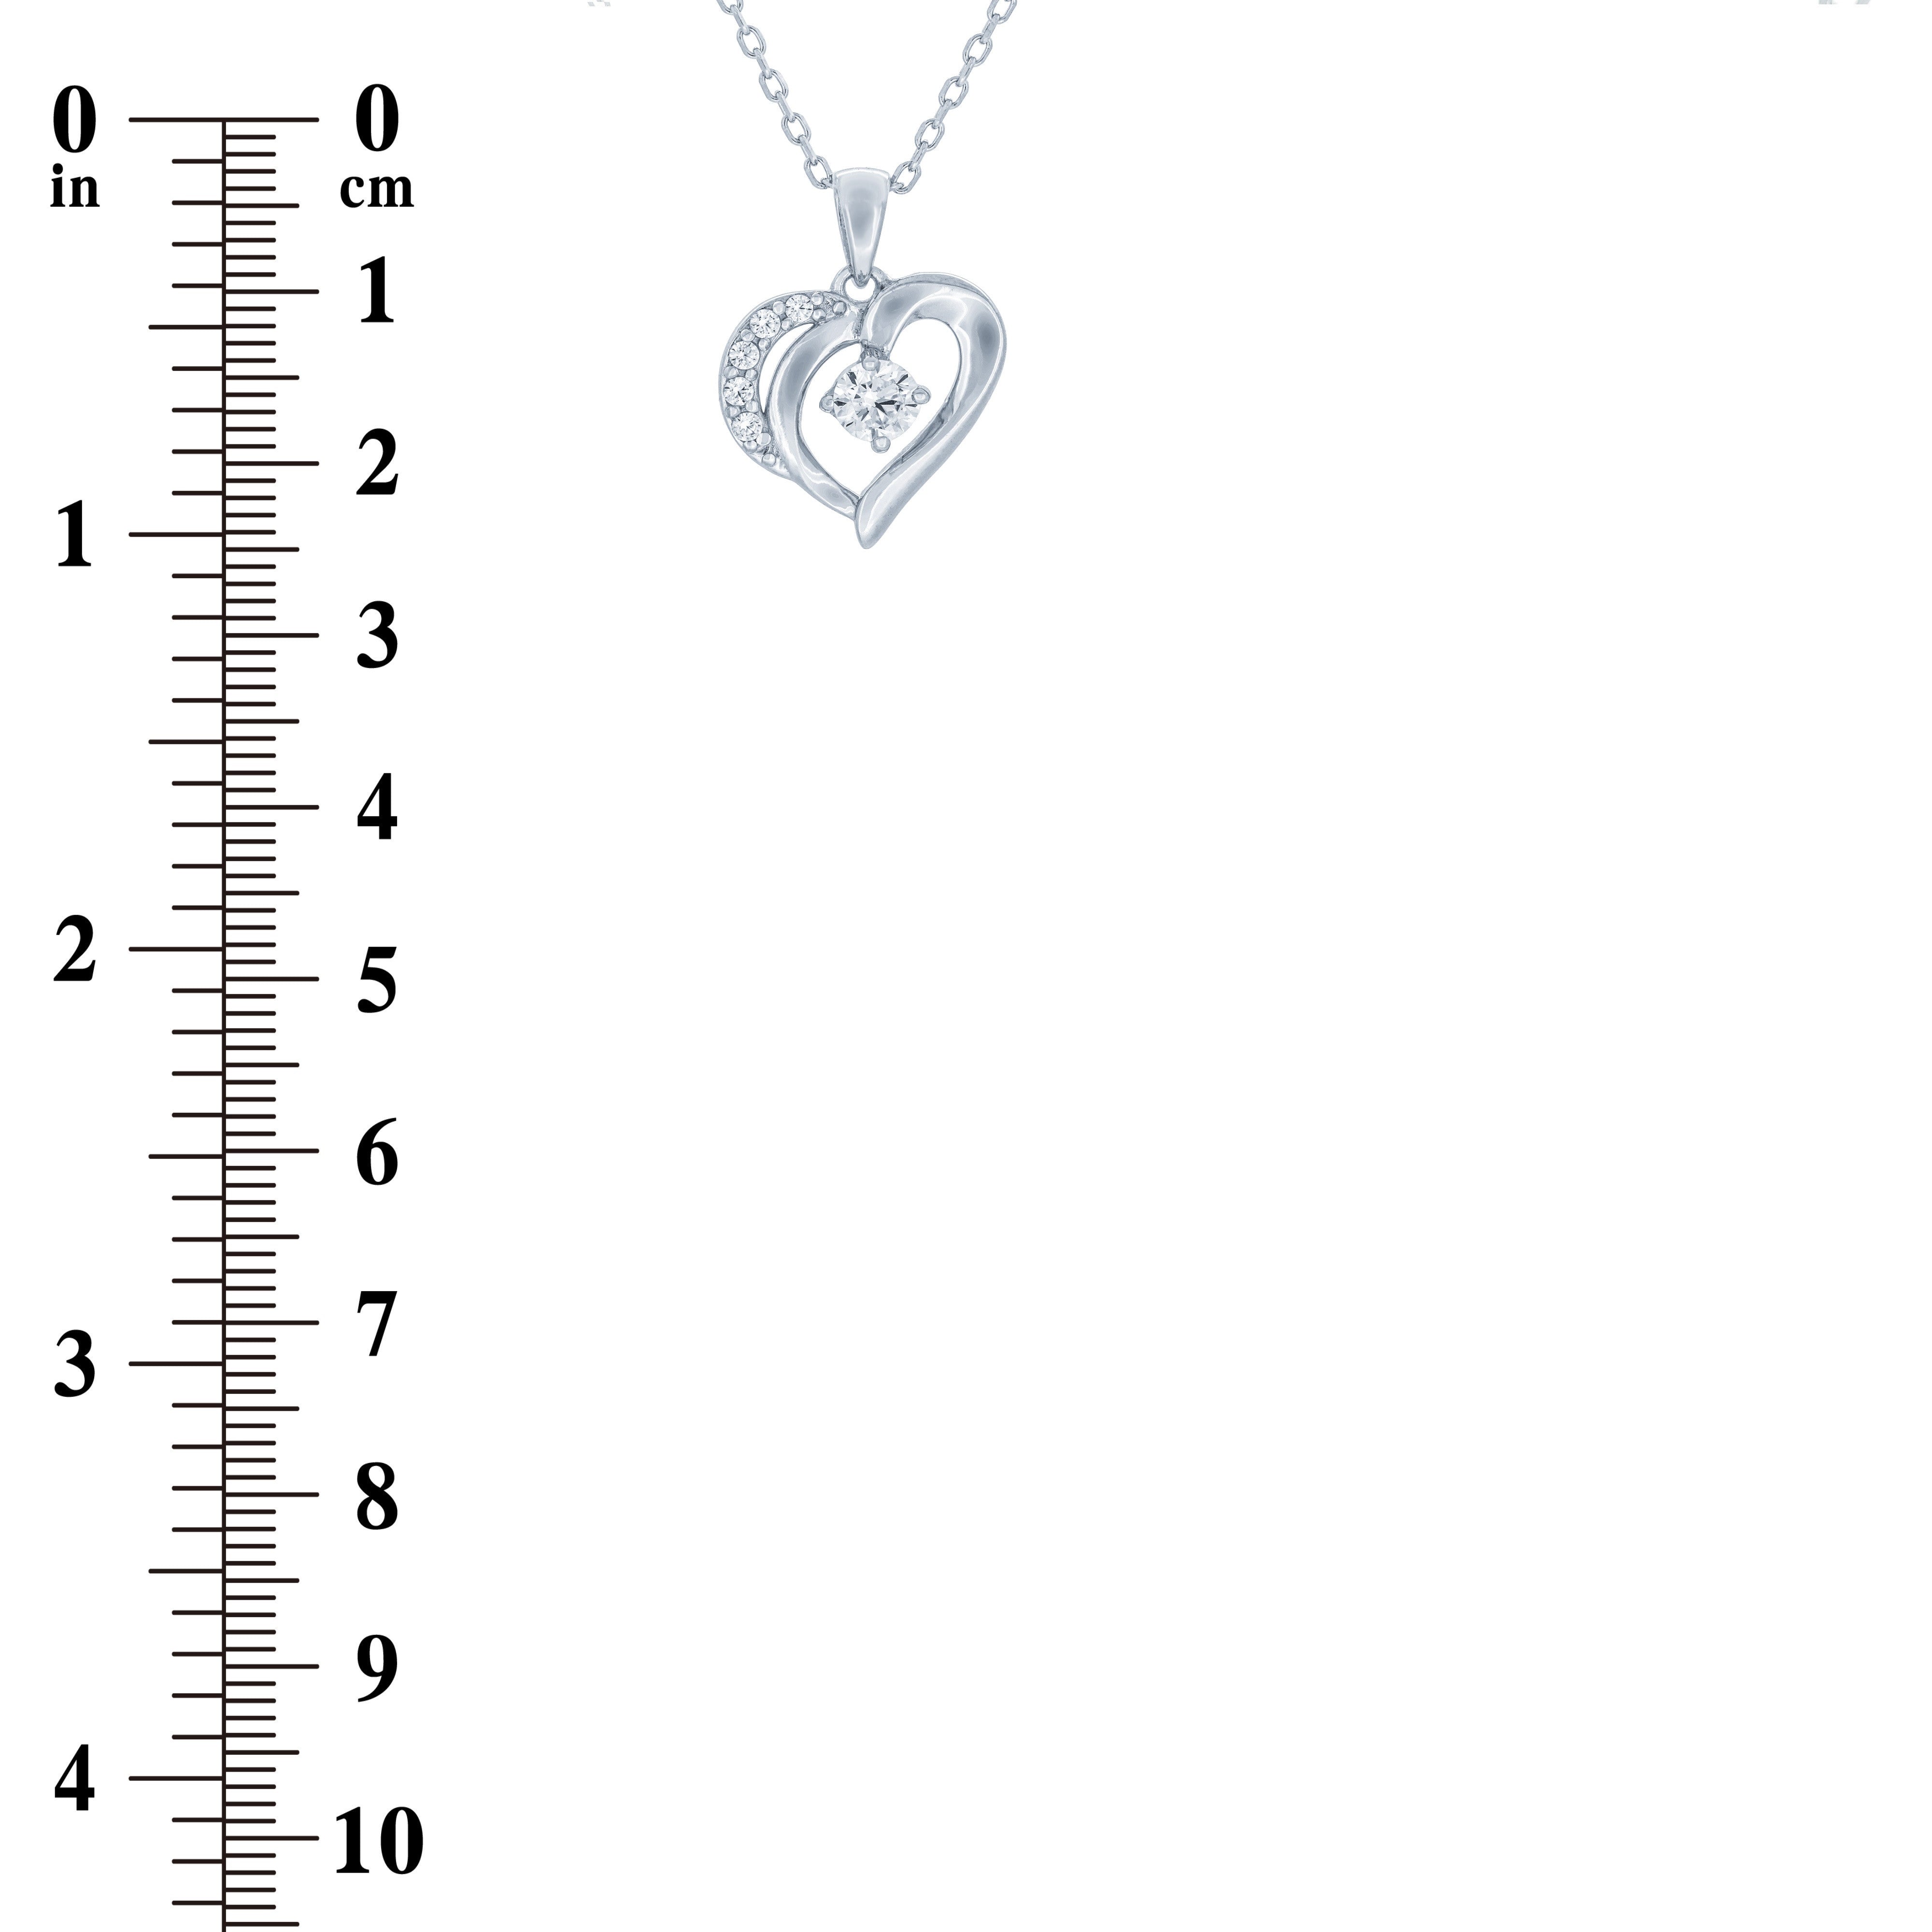 (100039) White Cubic Zirconia Heart Pendant Necklace In Sterling Silver